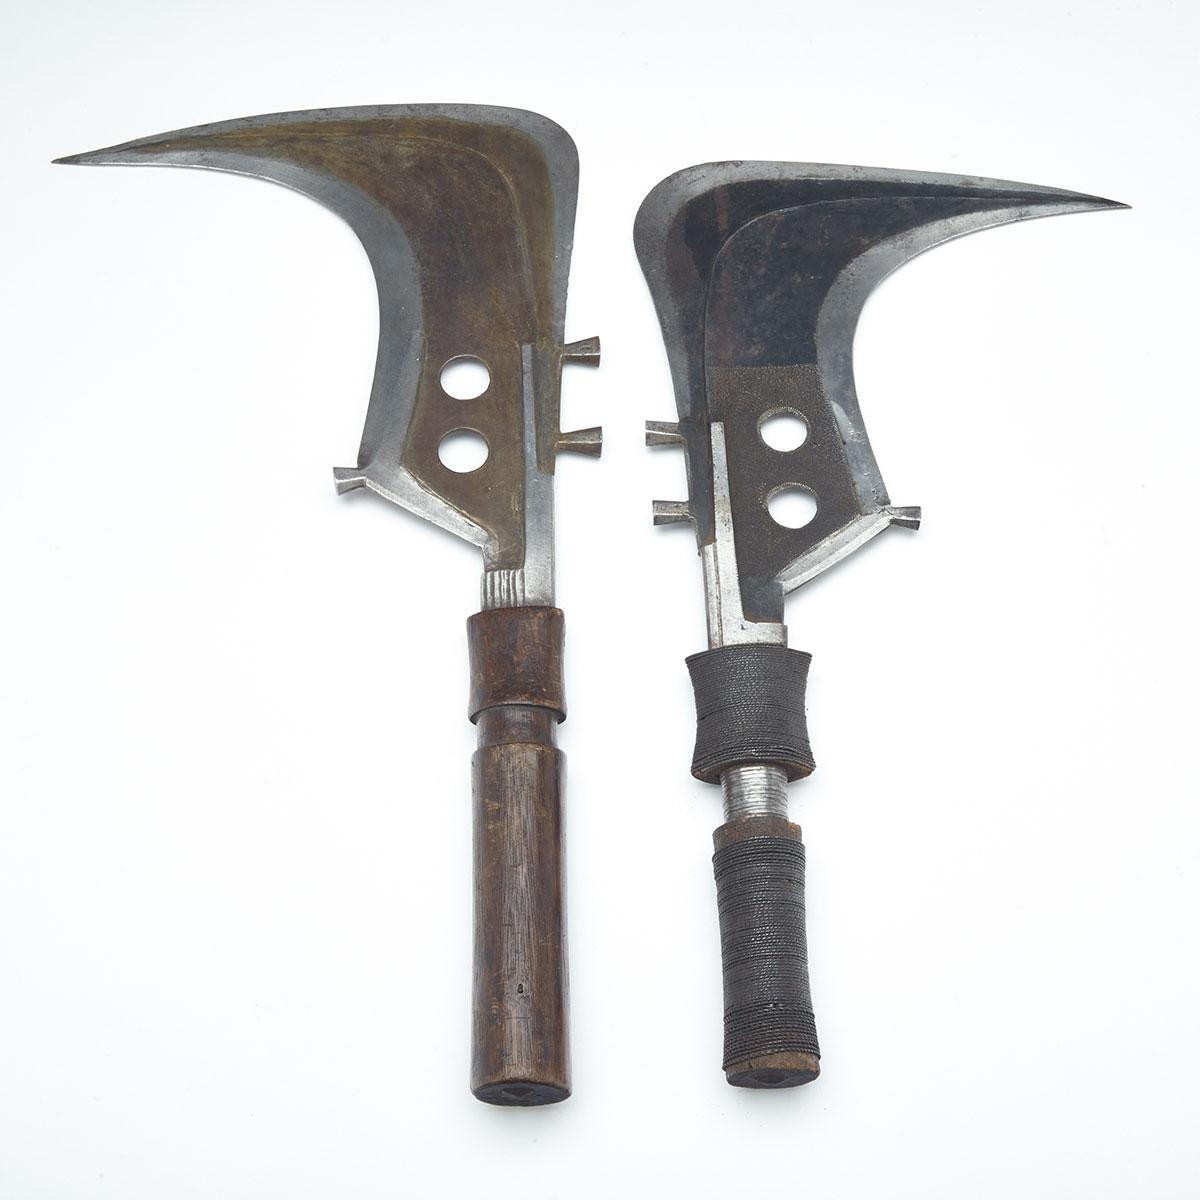 Two African Mangbetu Sickle Knives, 19th/early 20 century